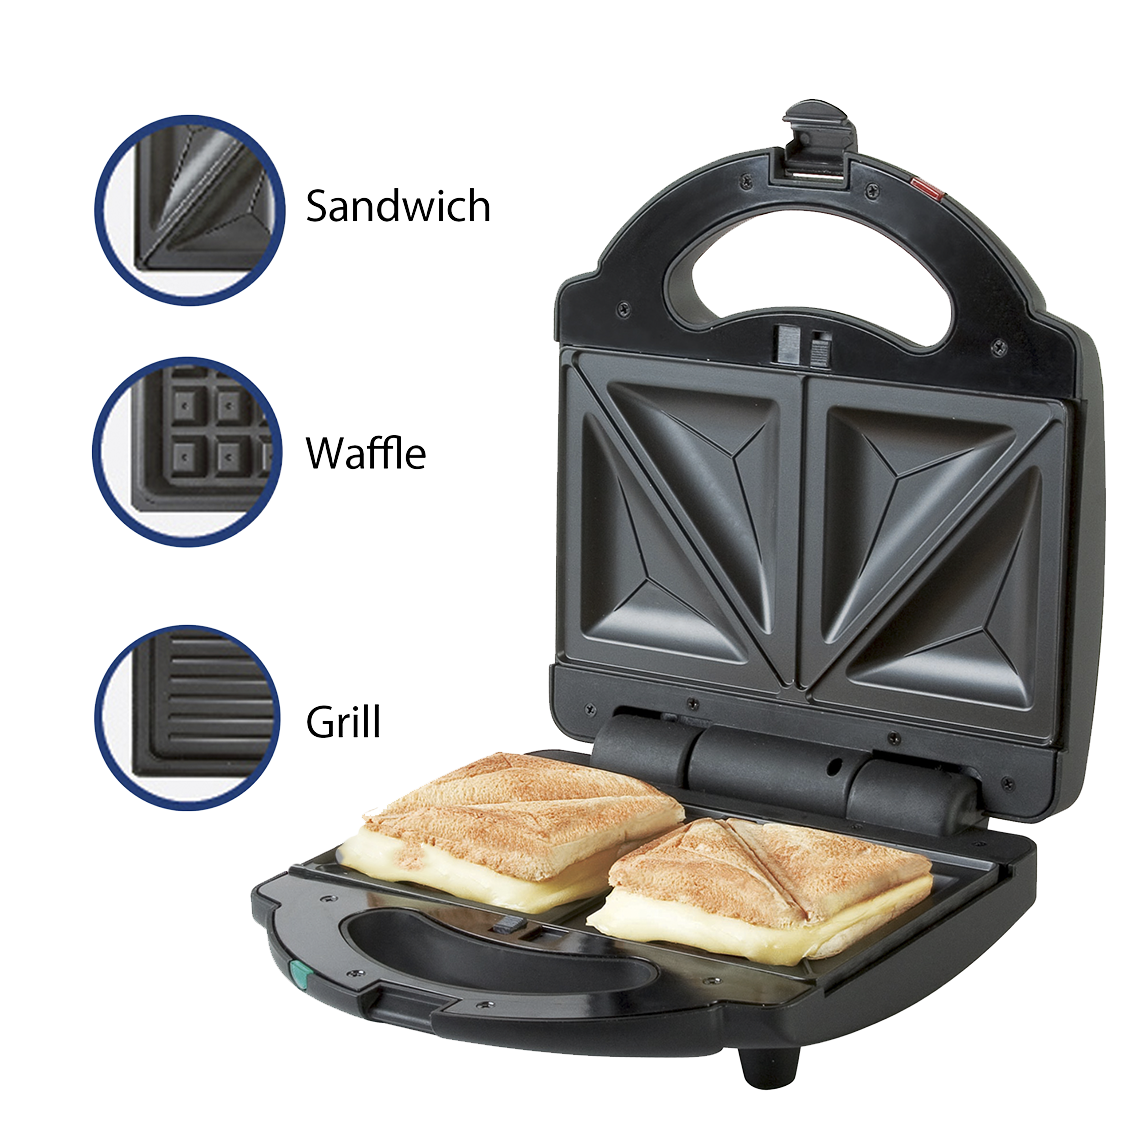 Premium Deluxe Multifuctional 2-Slice Sandwich Maker Stainless Steel decoration